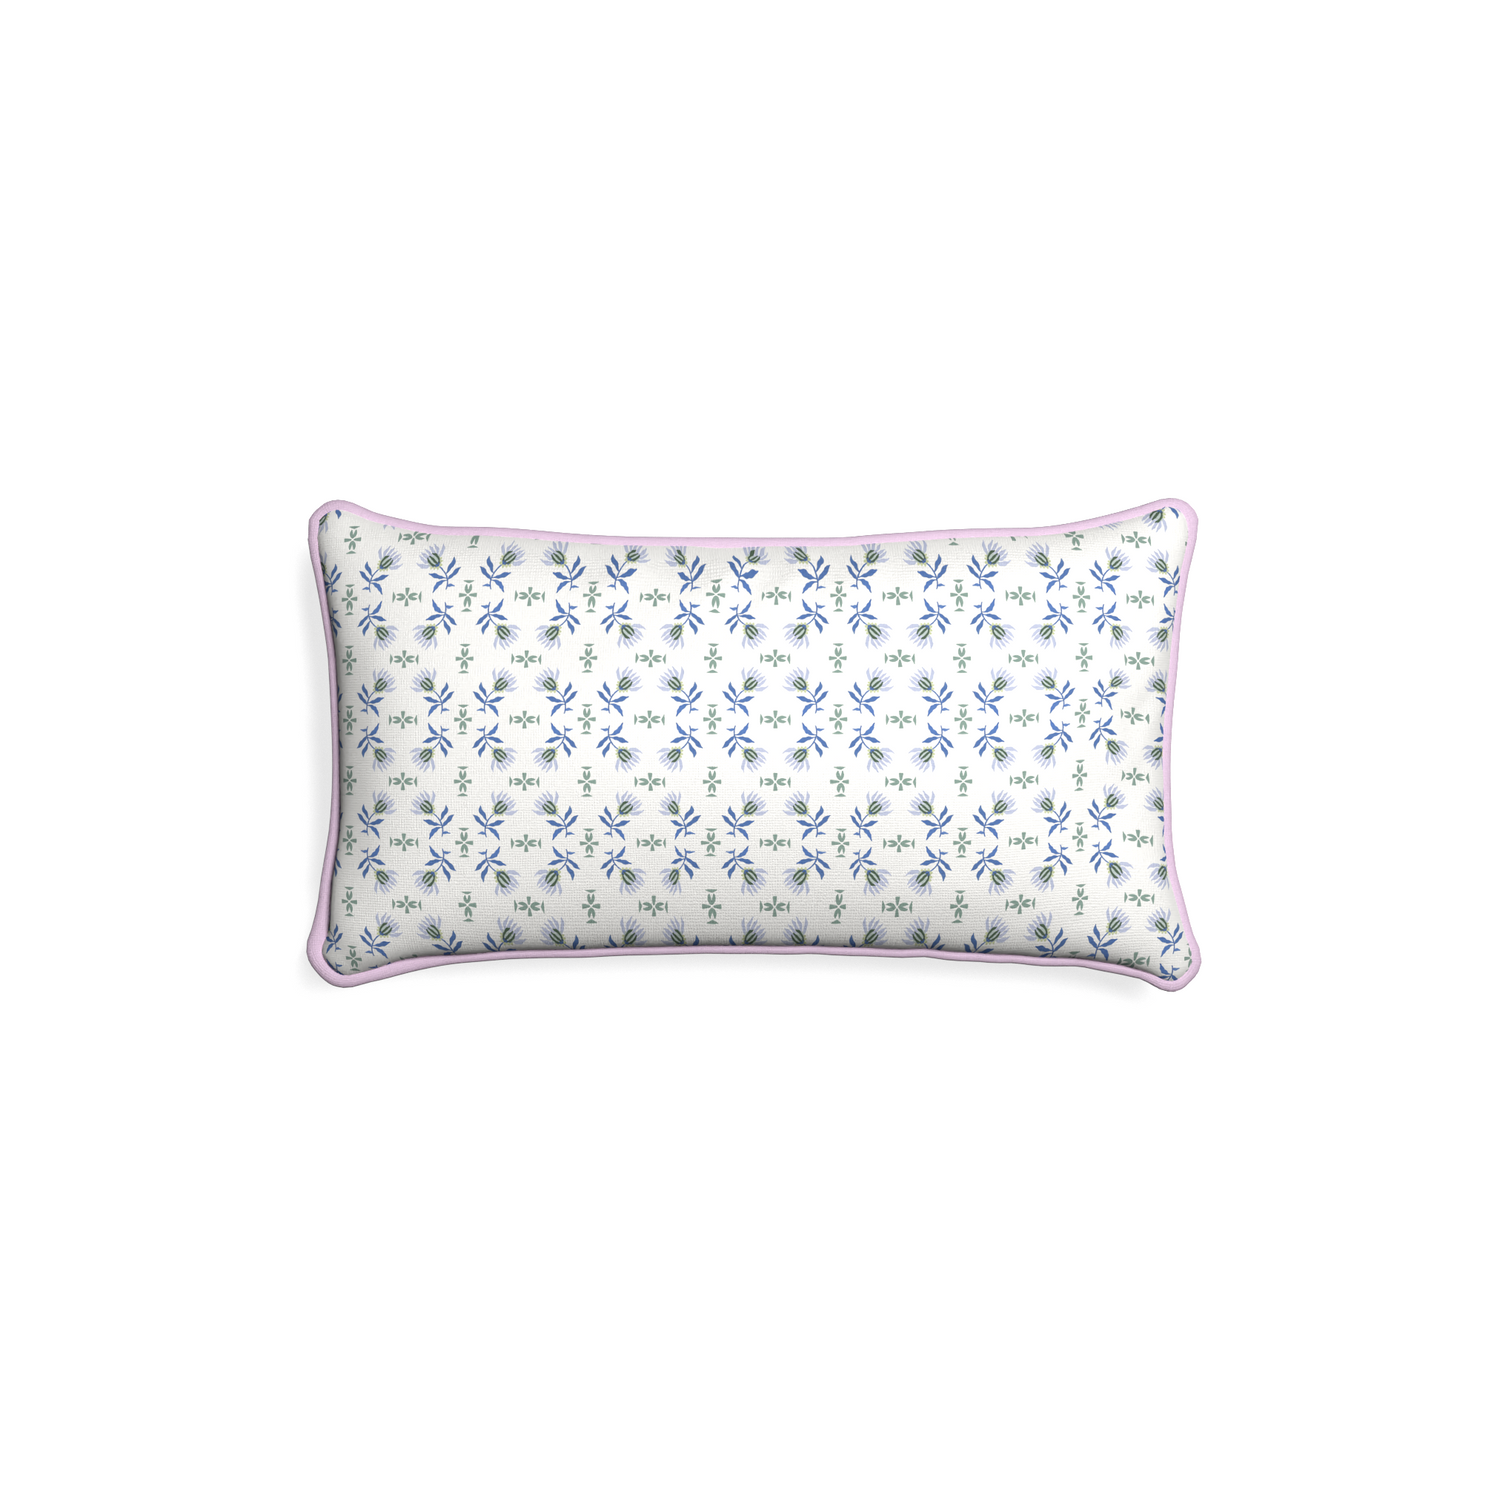 Petite-lumbar lee custom blue & green floralpillow with l piping on white background